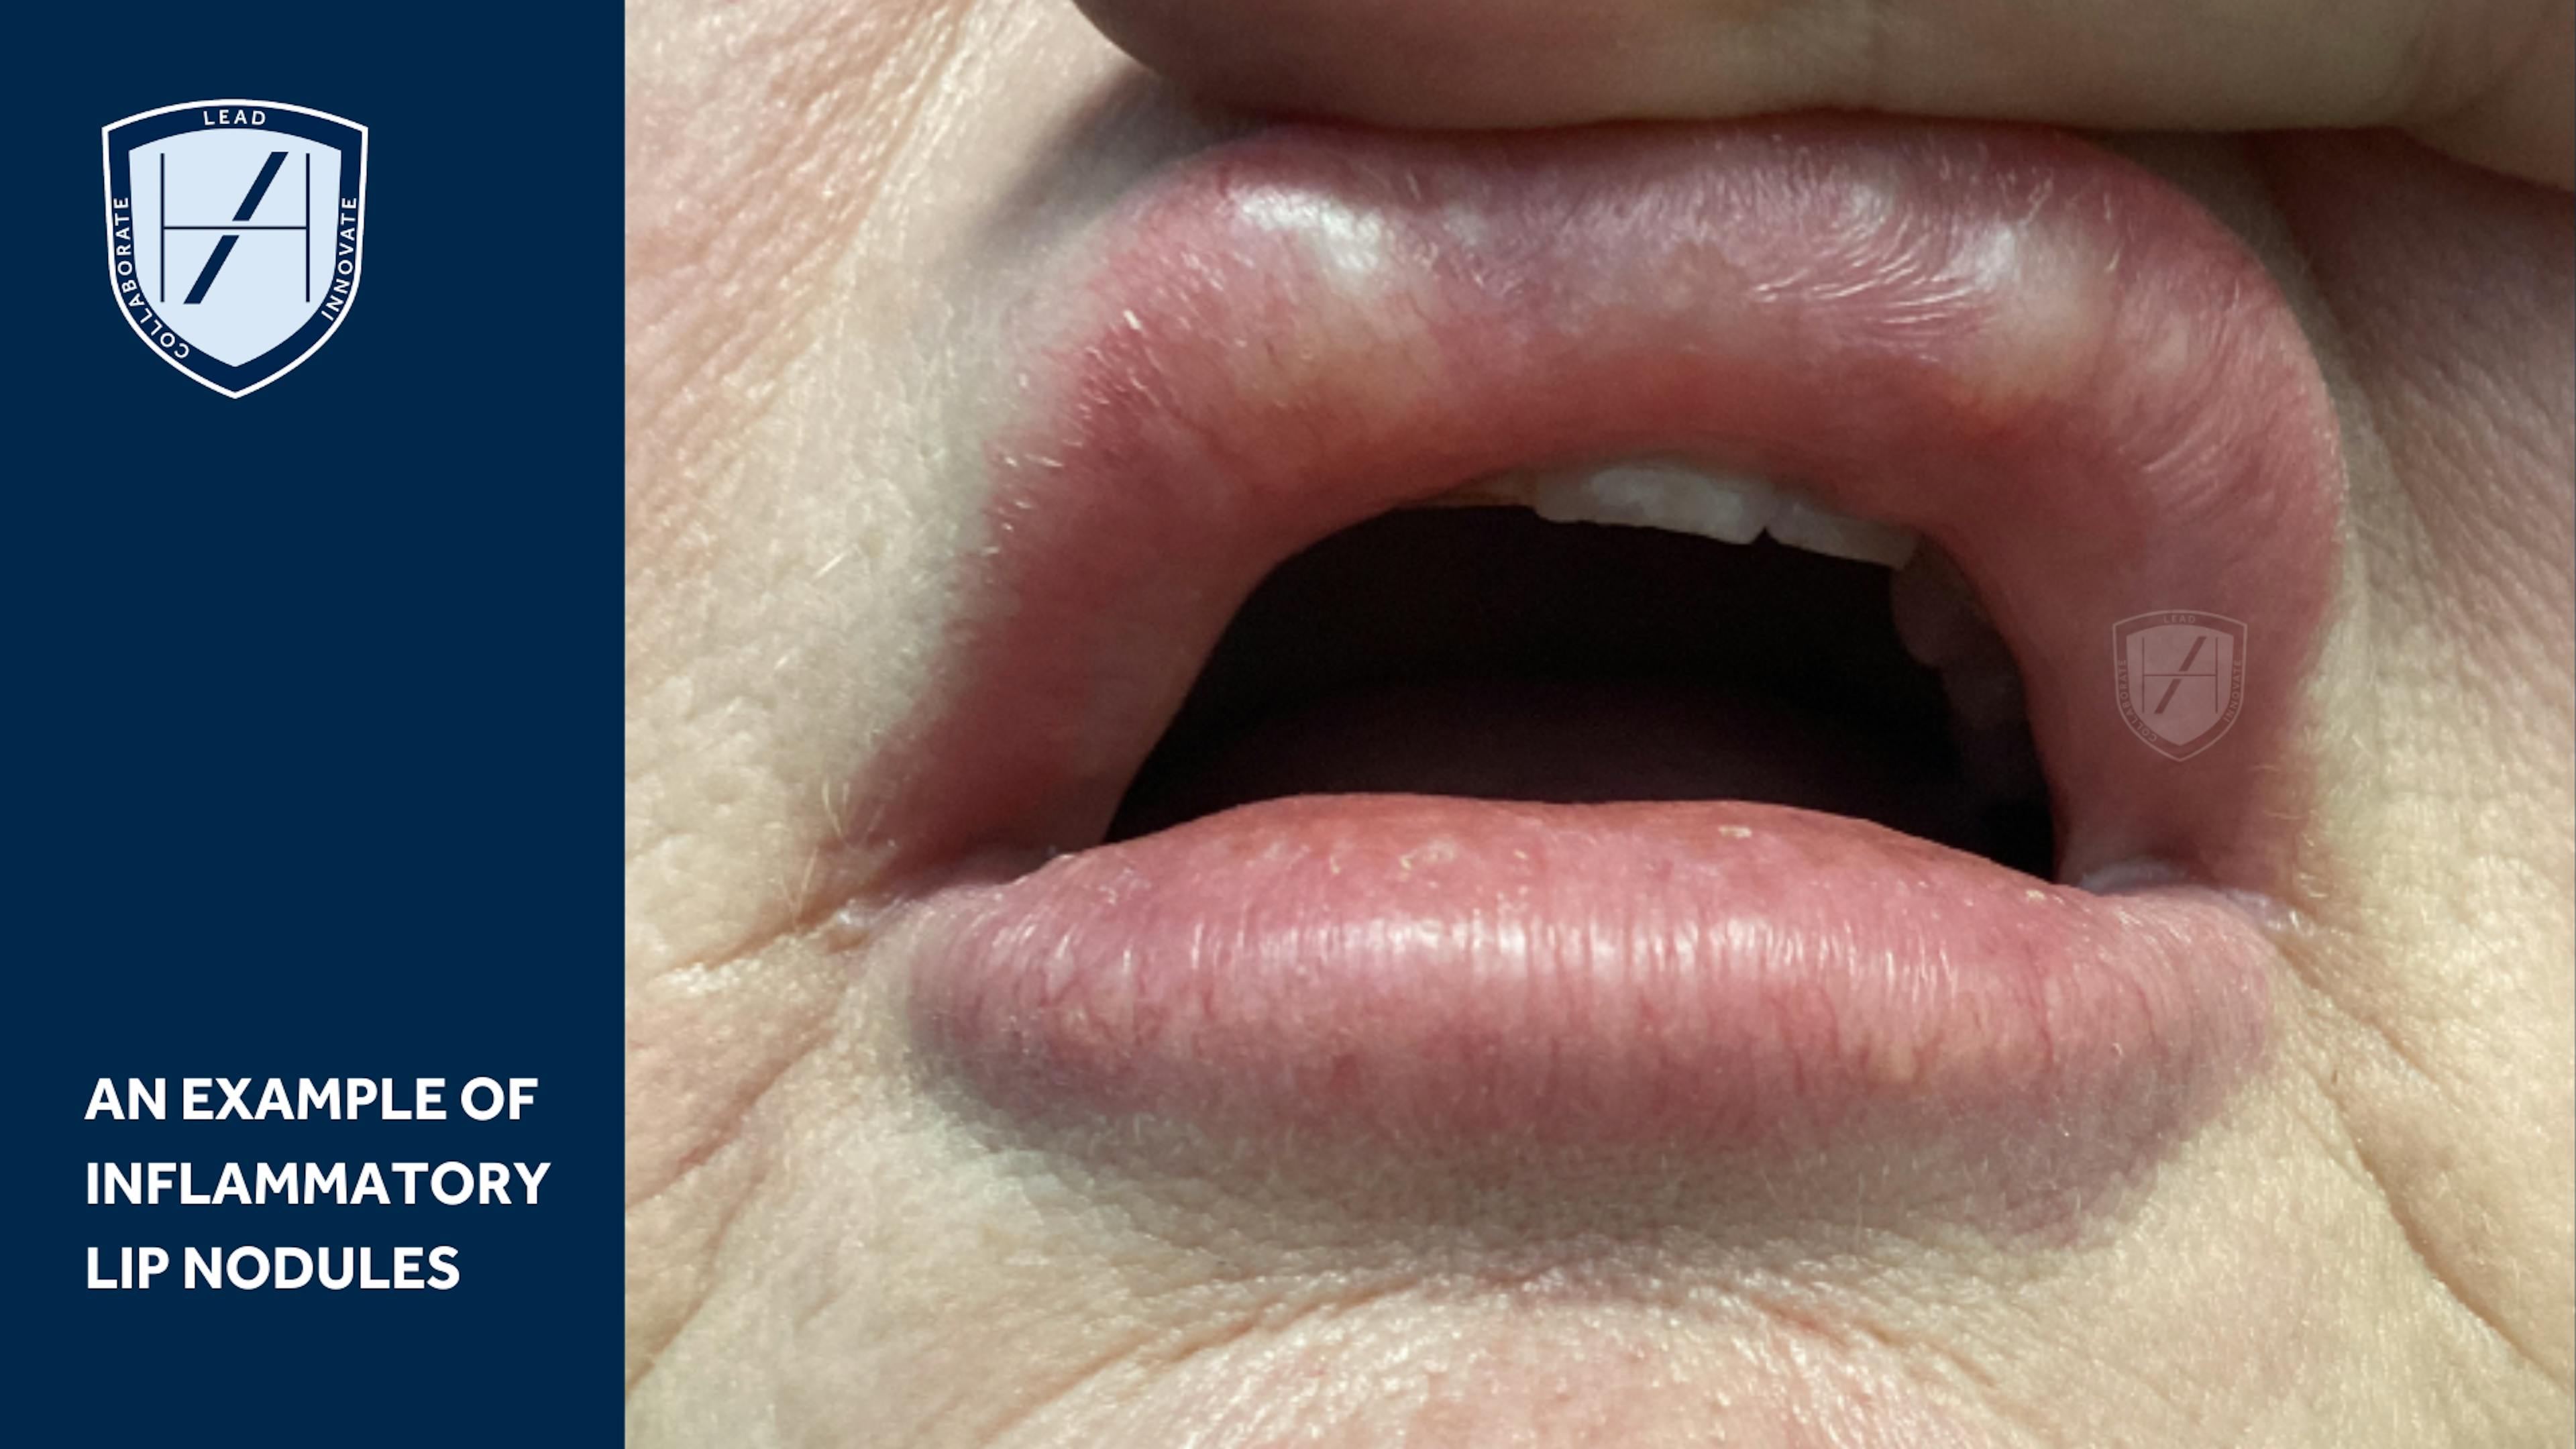 INFLAMMATORY NODULES OF THE LIPS DIAGRAM - FILLER-RELATED COMPLICATIONS